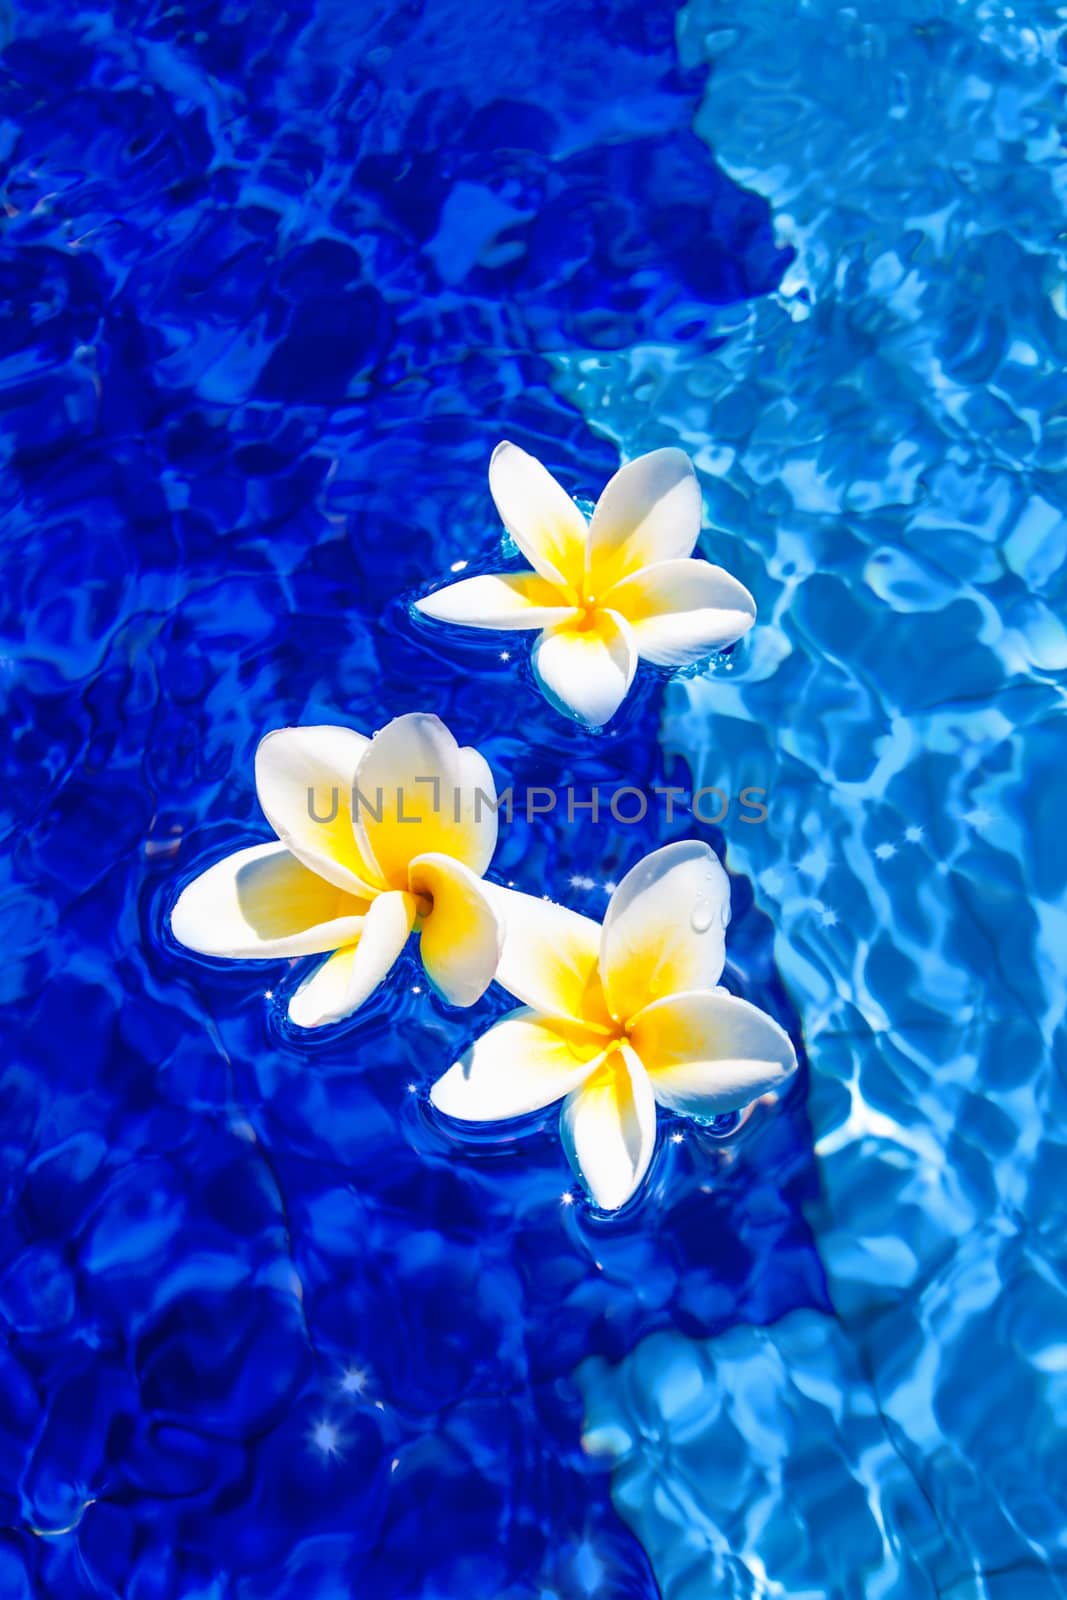 Peaceful spa photo with white magnolia flowers laying on ripple in the pool